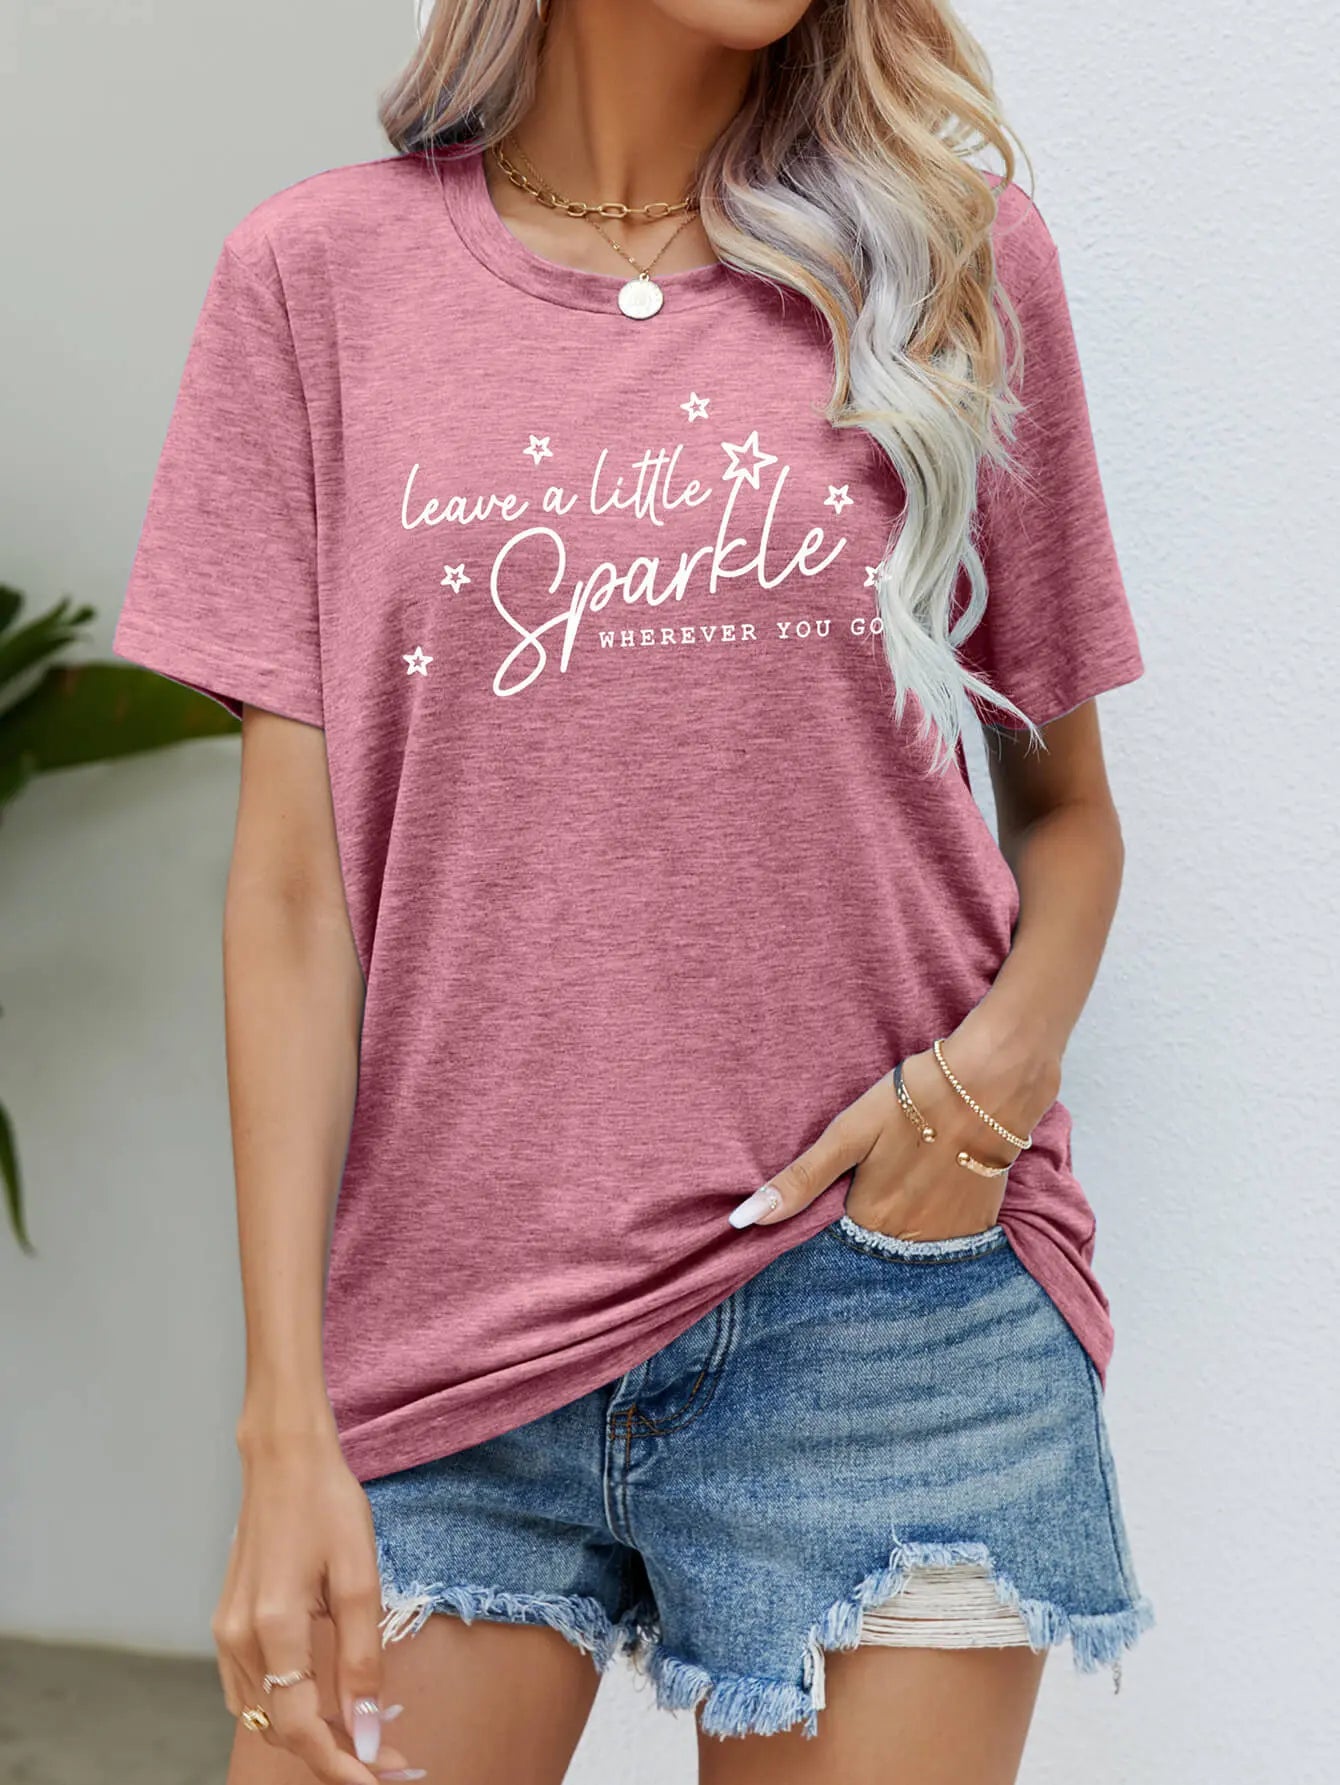 LEAVE A LITTLE SPARKLE WHEREVER YOU GO Tee Shirt - Image #16